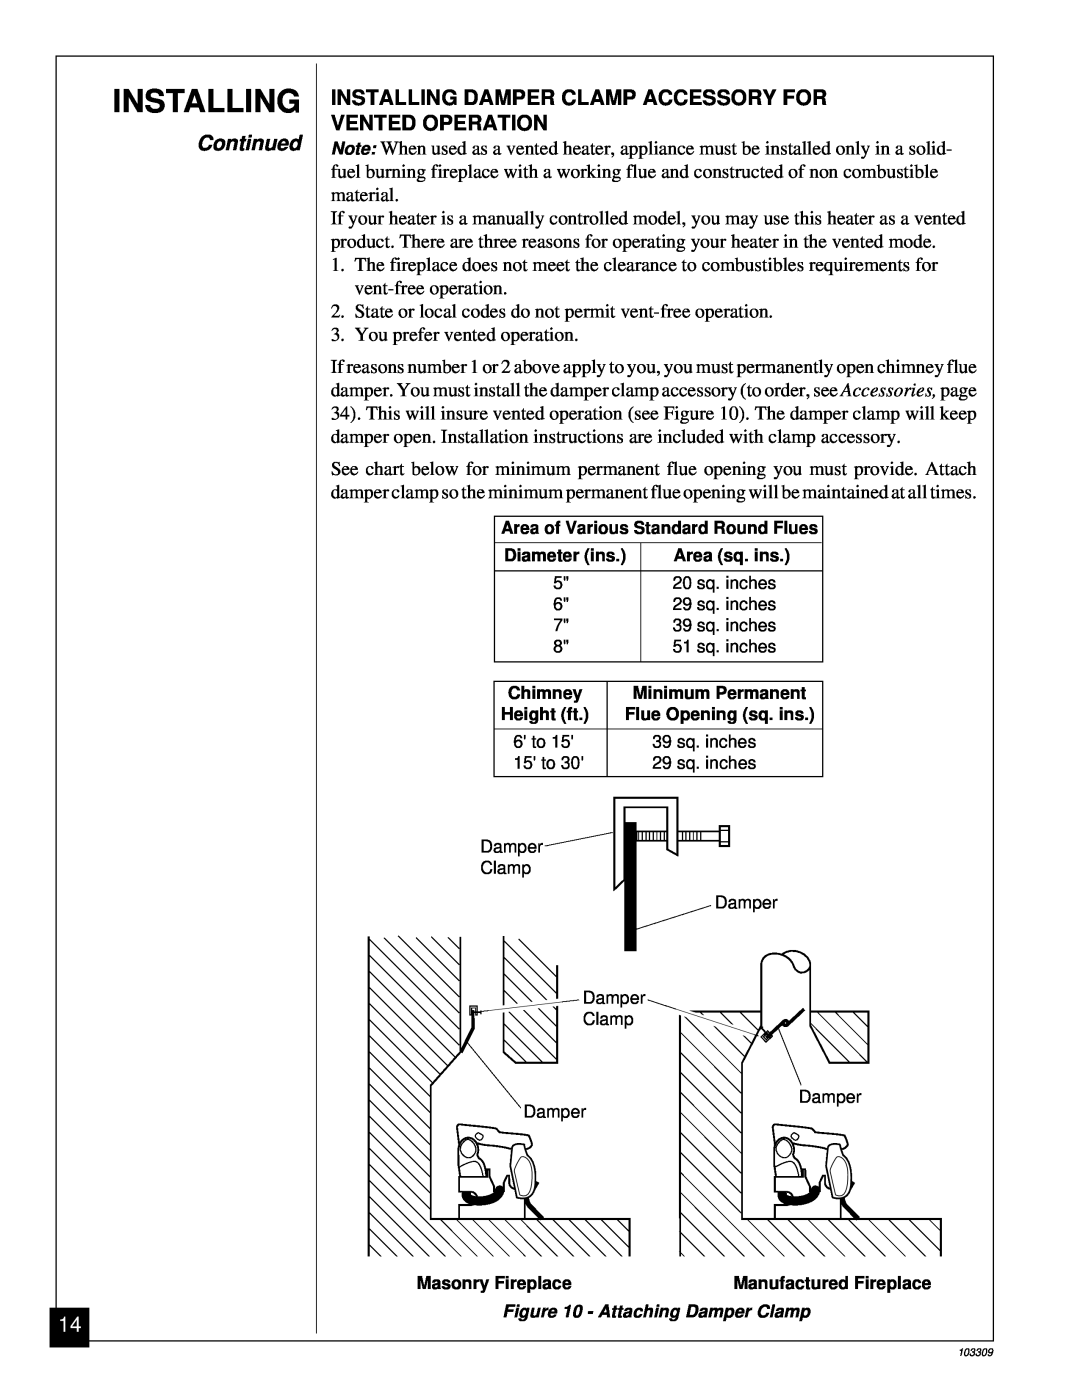 Desa UNVENTED (VENT-FREE) NATURAL GAS LOG HEATER installation manual Installing, Continued, You prefer vented operation 